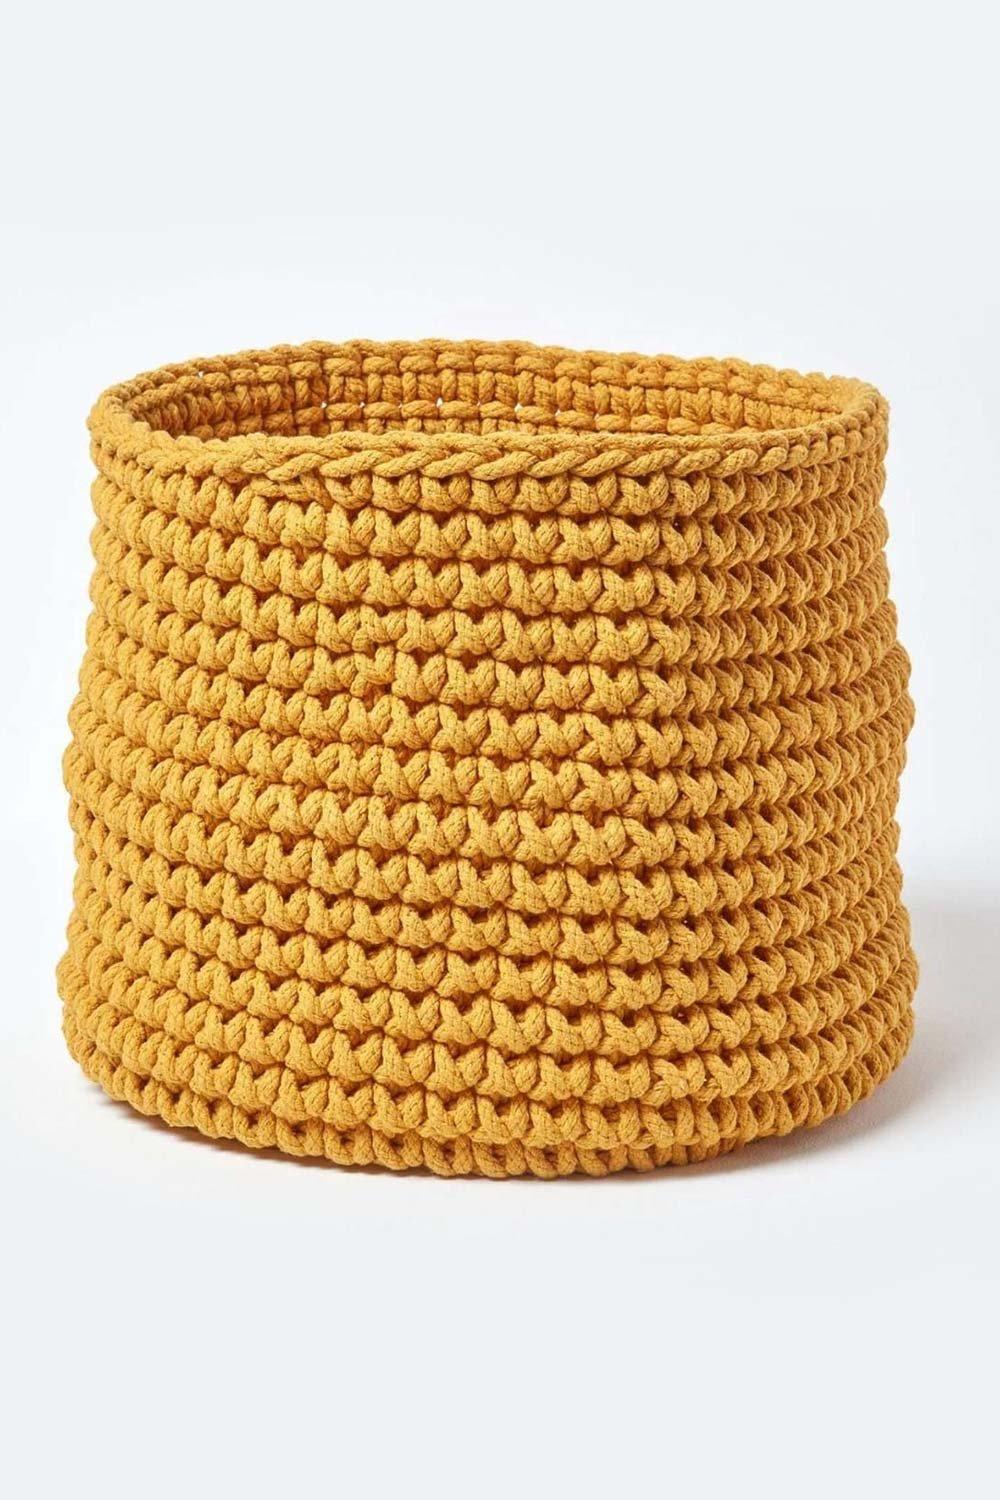 Homescapes Cotton Knitted Round Storage Basket, 42 x 37 cm|yellow